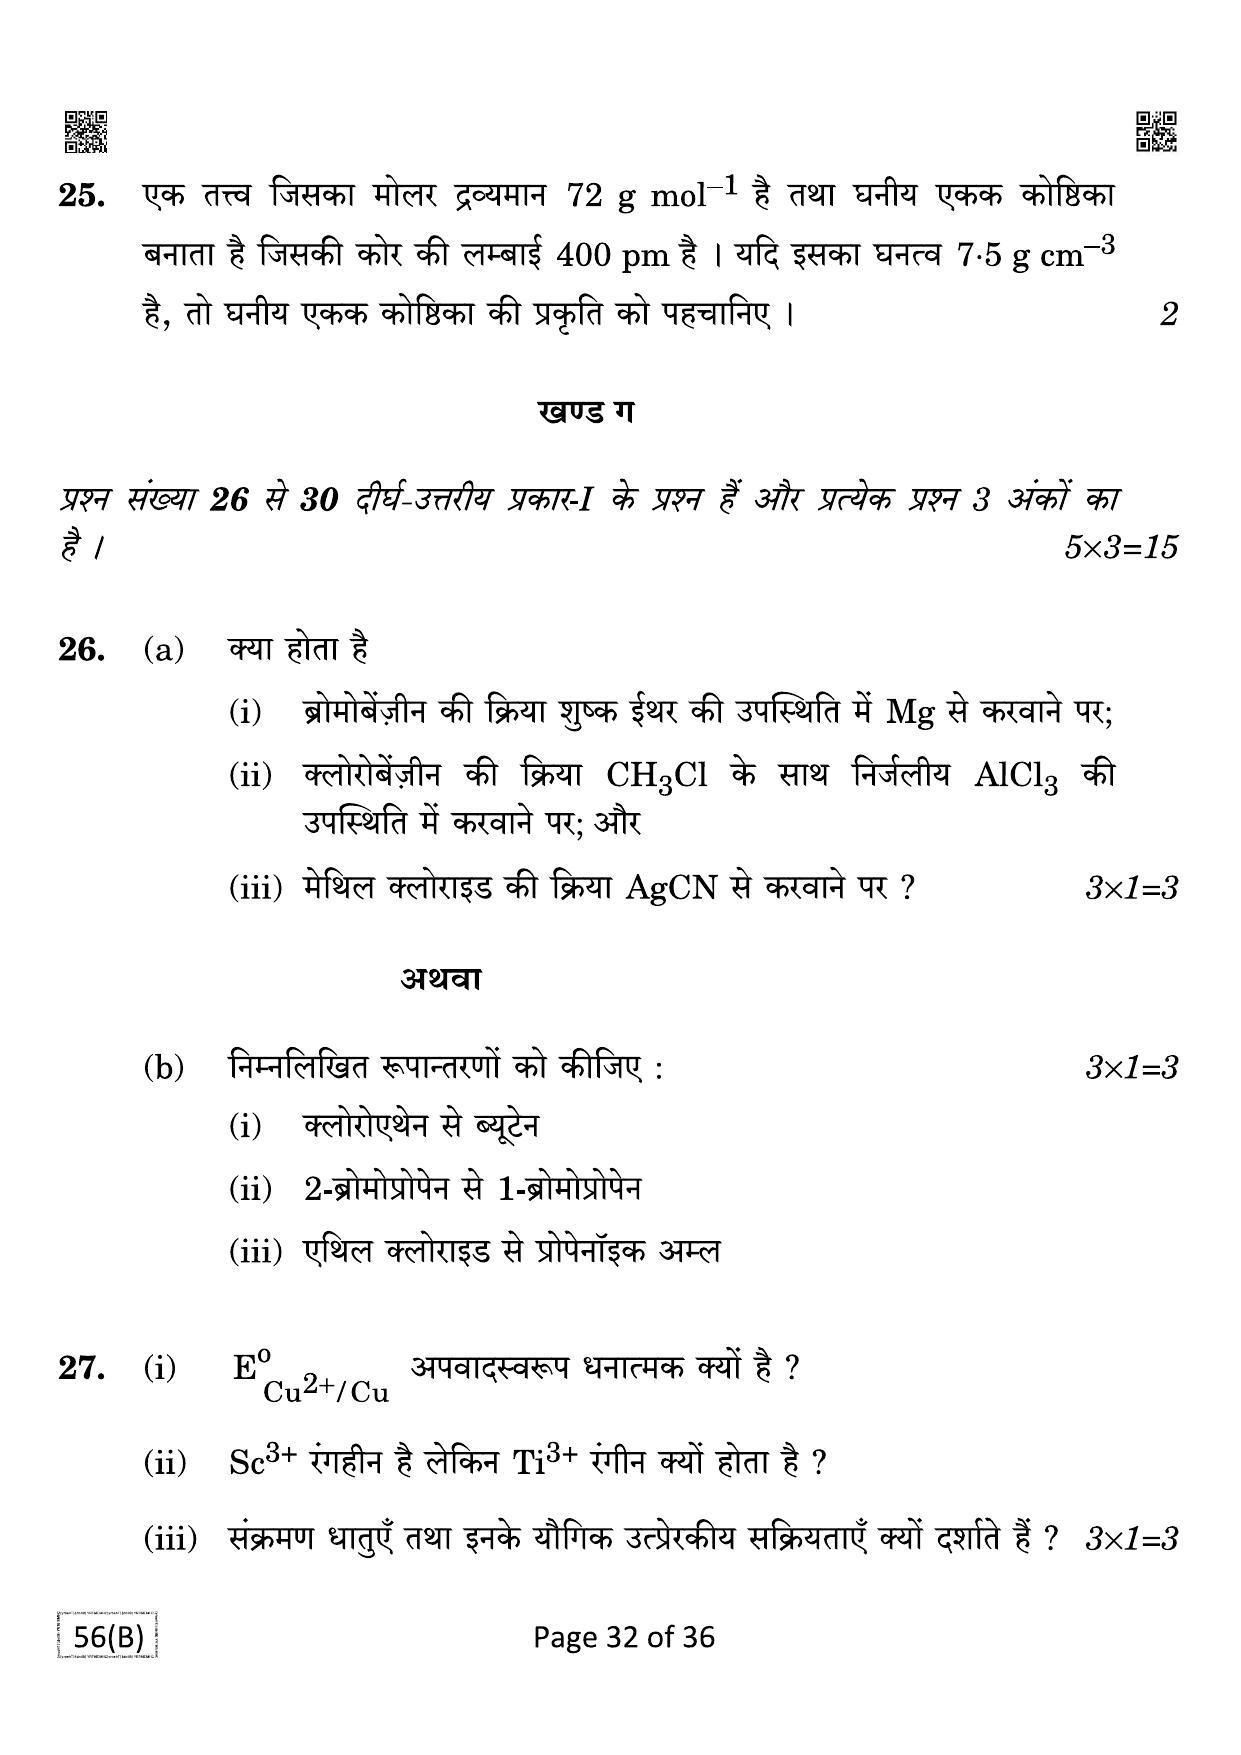 CBSE Class 12 QP_043_CHEMISTRY_FOR_BLIND_CANDIDATES 2021 Compartment Question Paper - Page 32